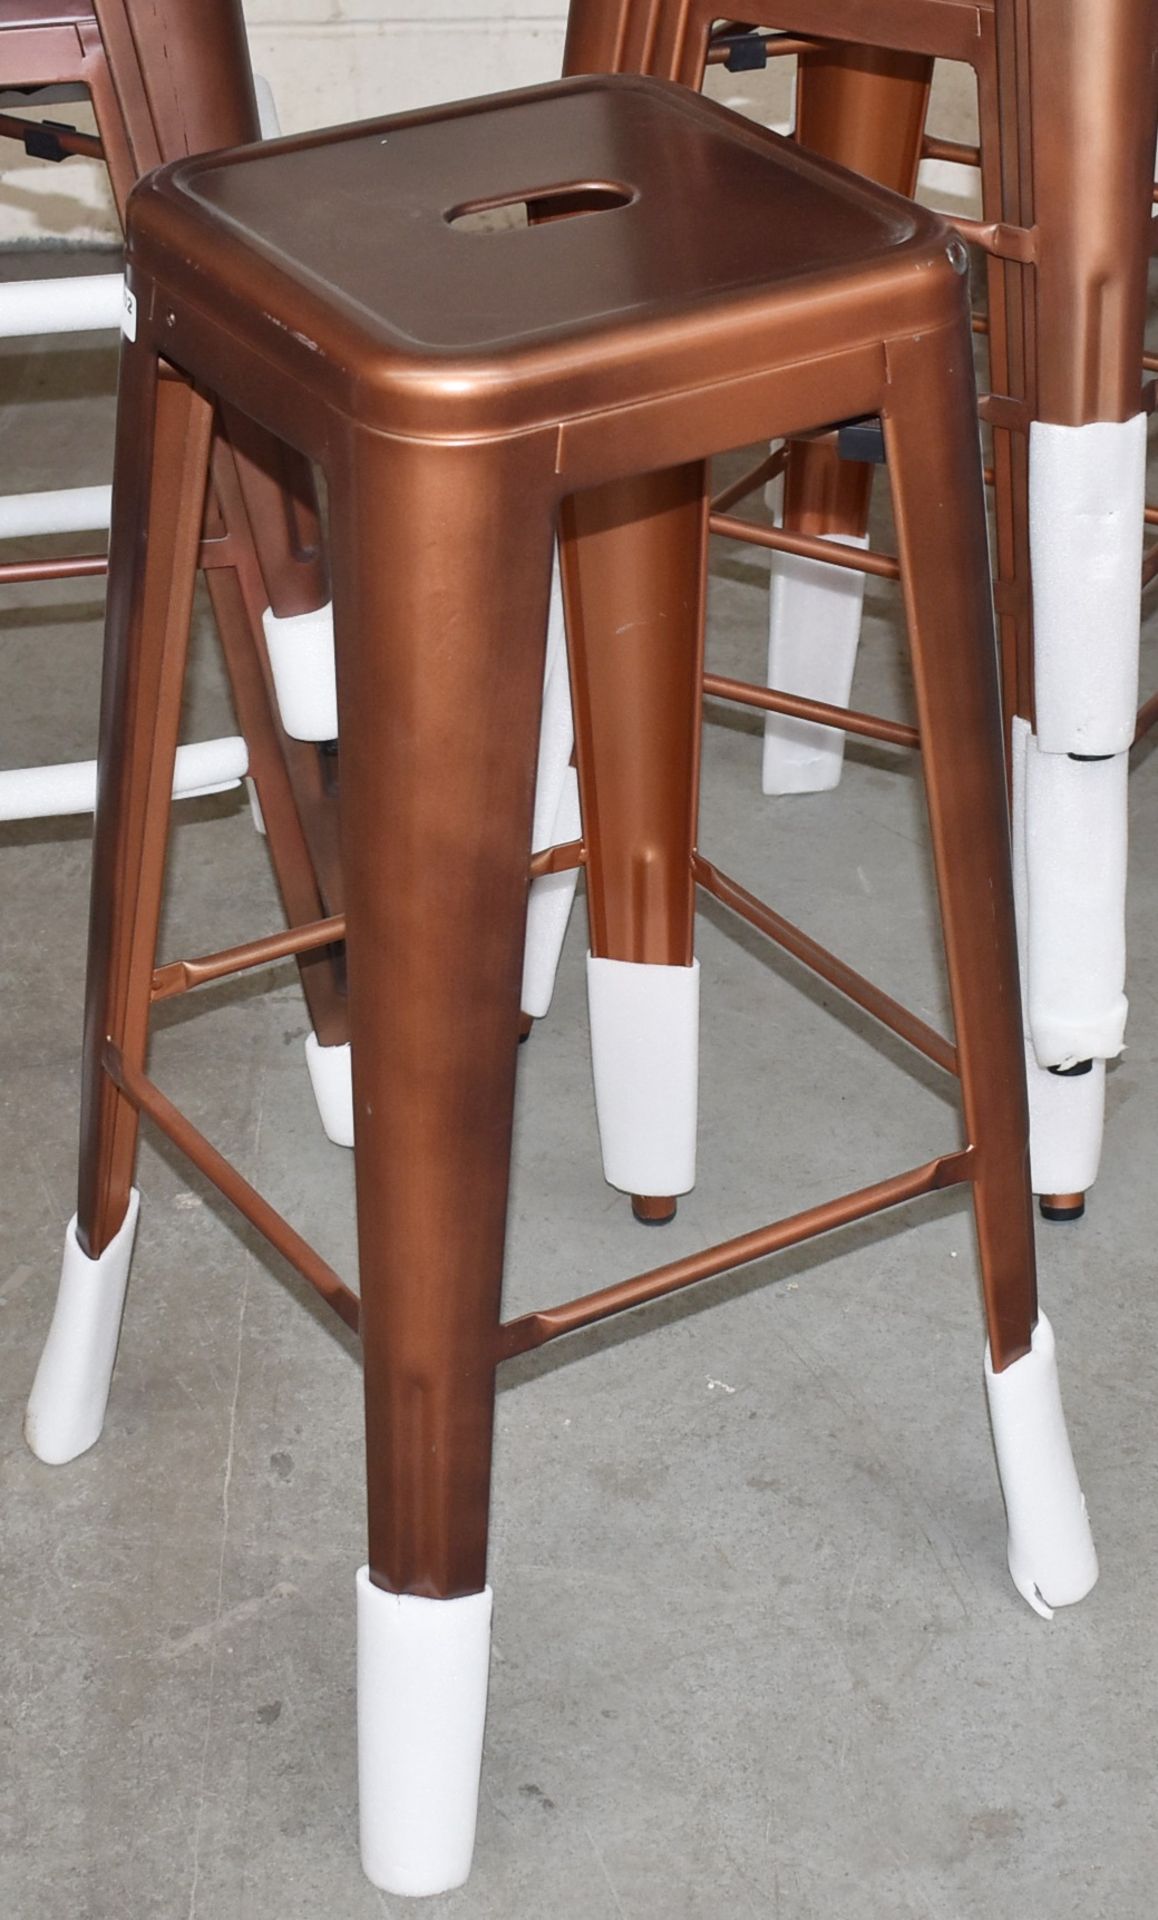 1 x Tolix Industrial Style Outdoor Bar Table and Bar Stool Set in Copper - Includes 1 x Bar Table - Image 9 of 9